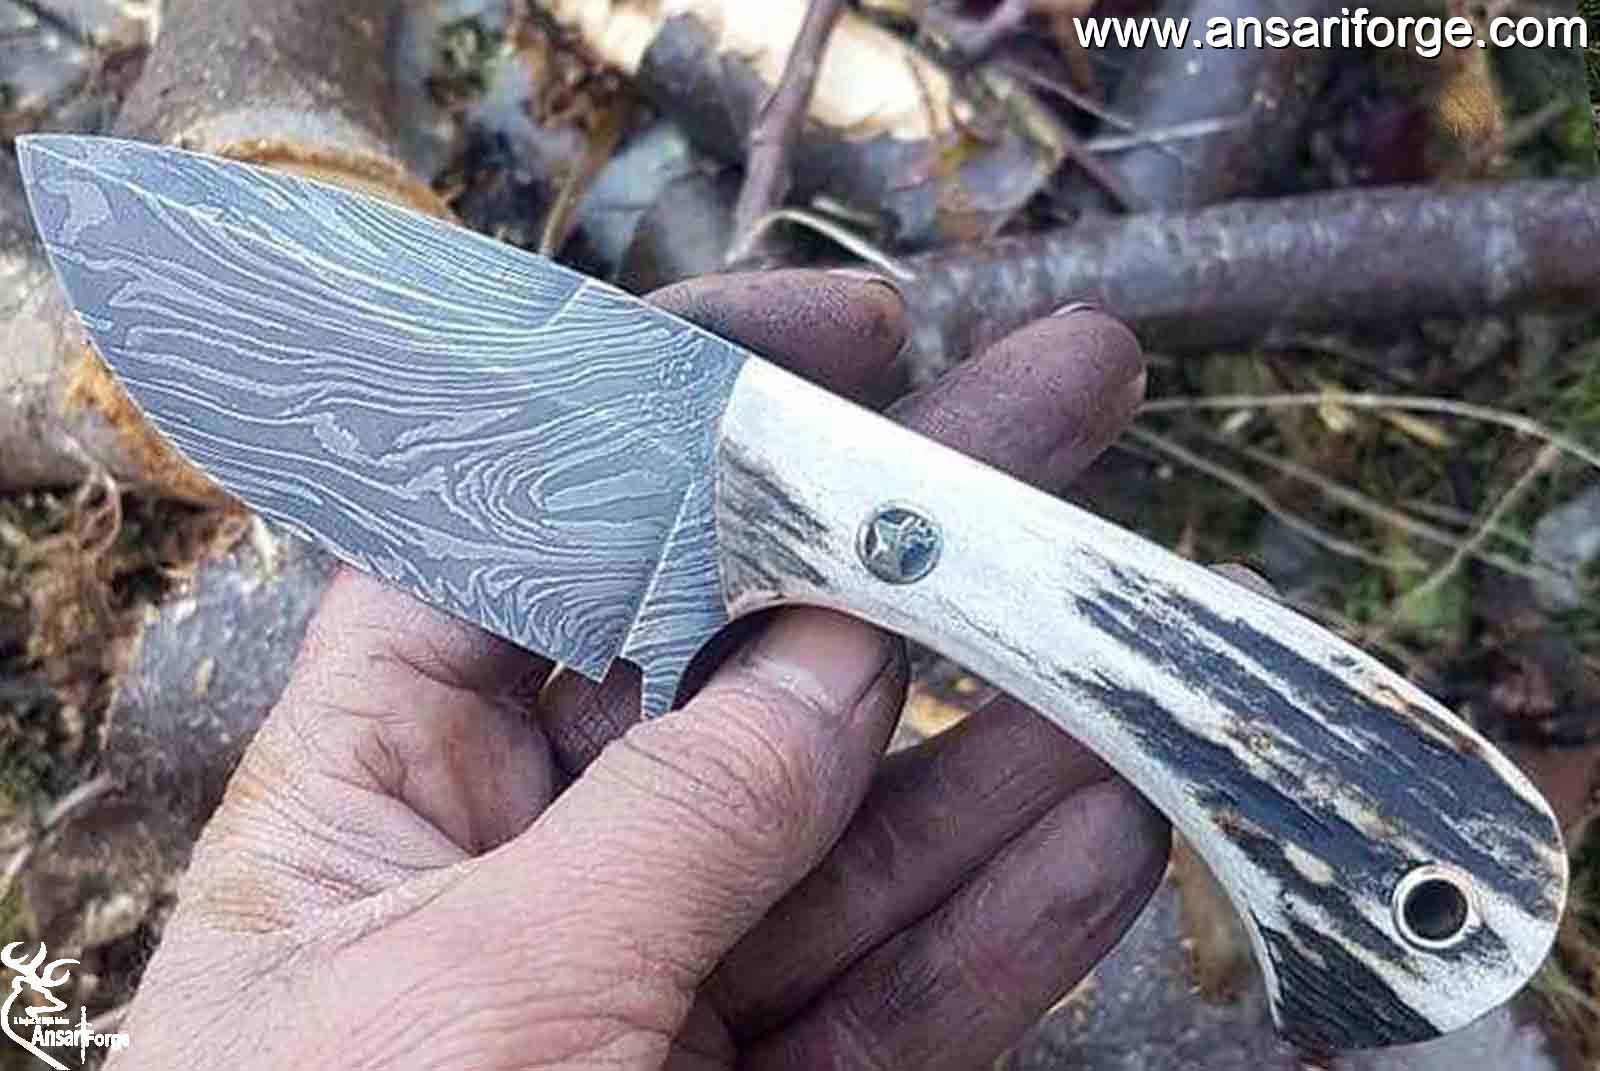  Damascus Knives for Hunting Skinning - Fixed Blade